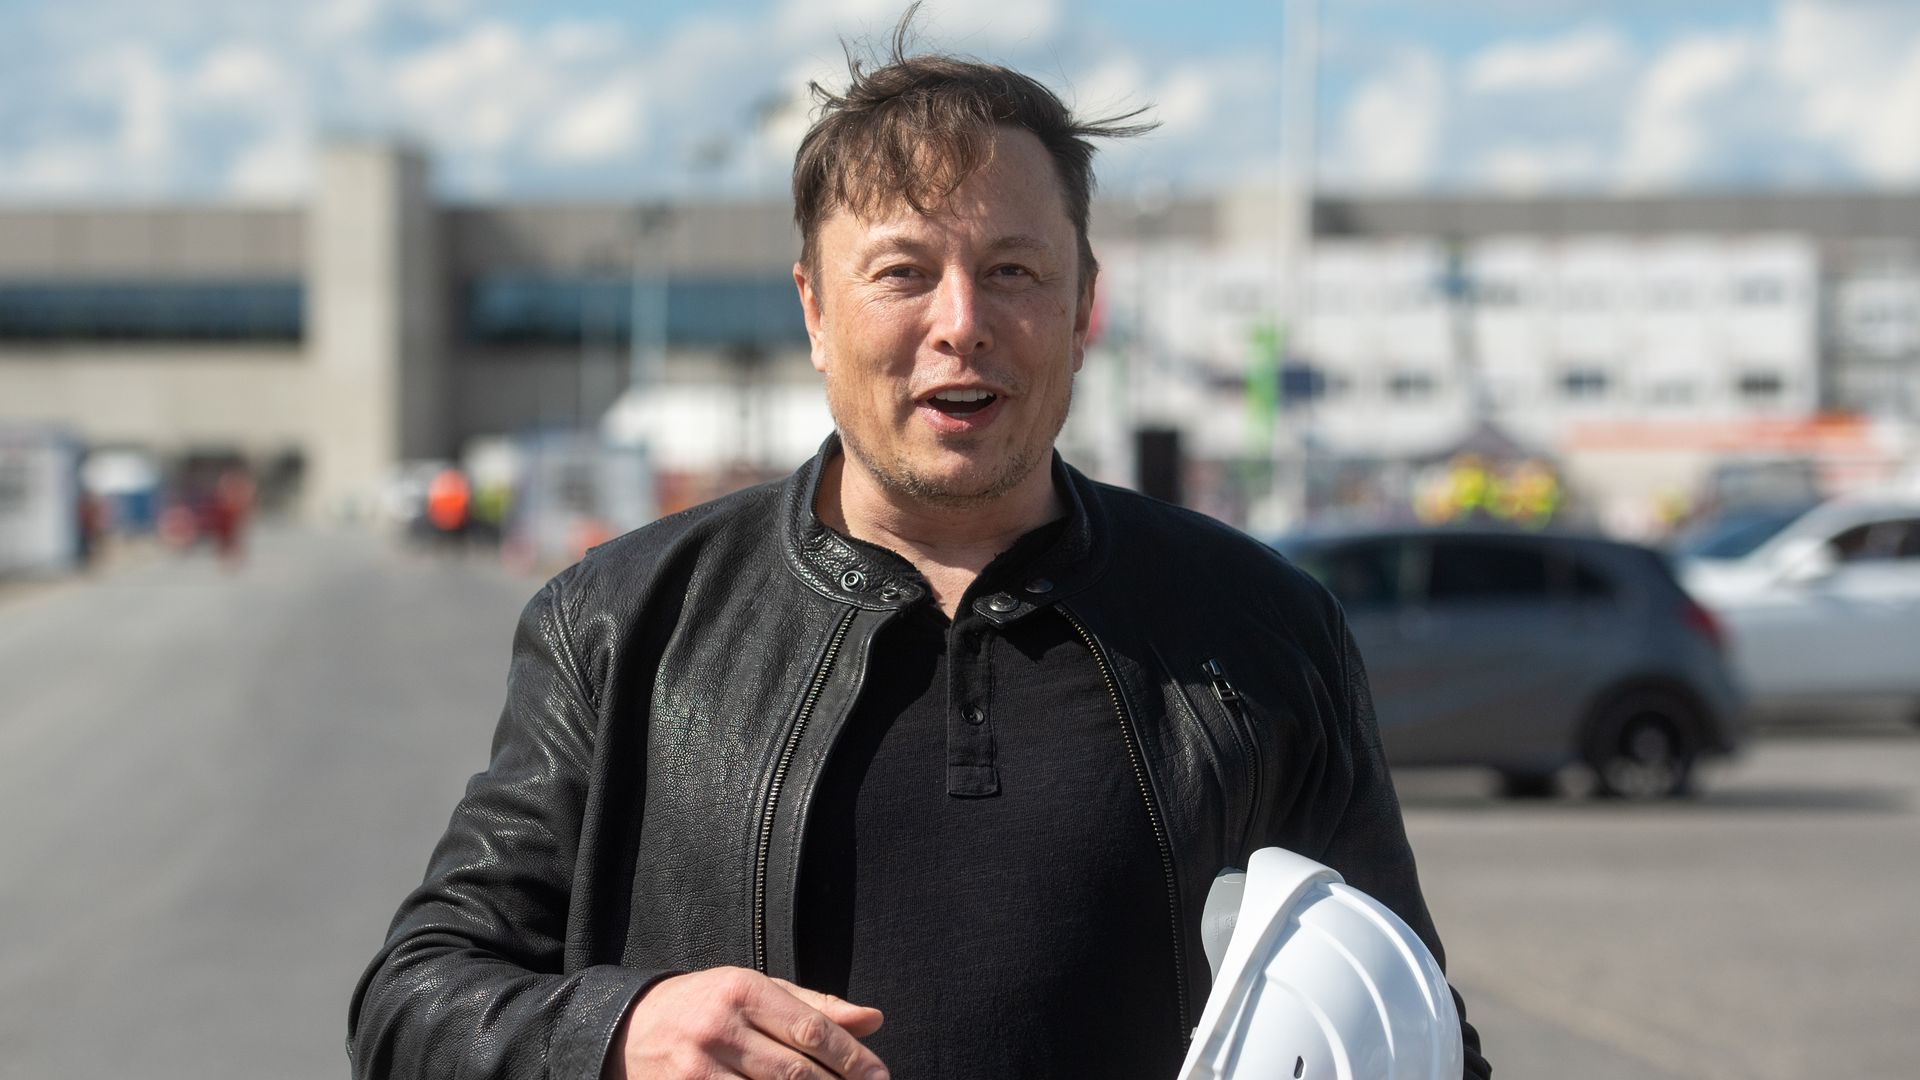 Elon Musk, Tesla CEO, stands on the construction site of the Tesla factory holding his hard hat in Berlin, Germany